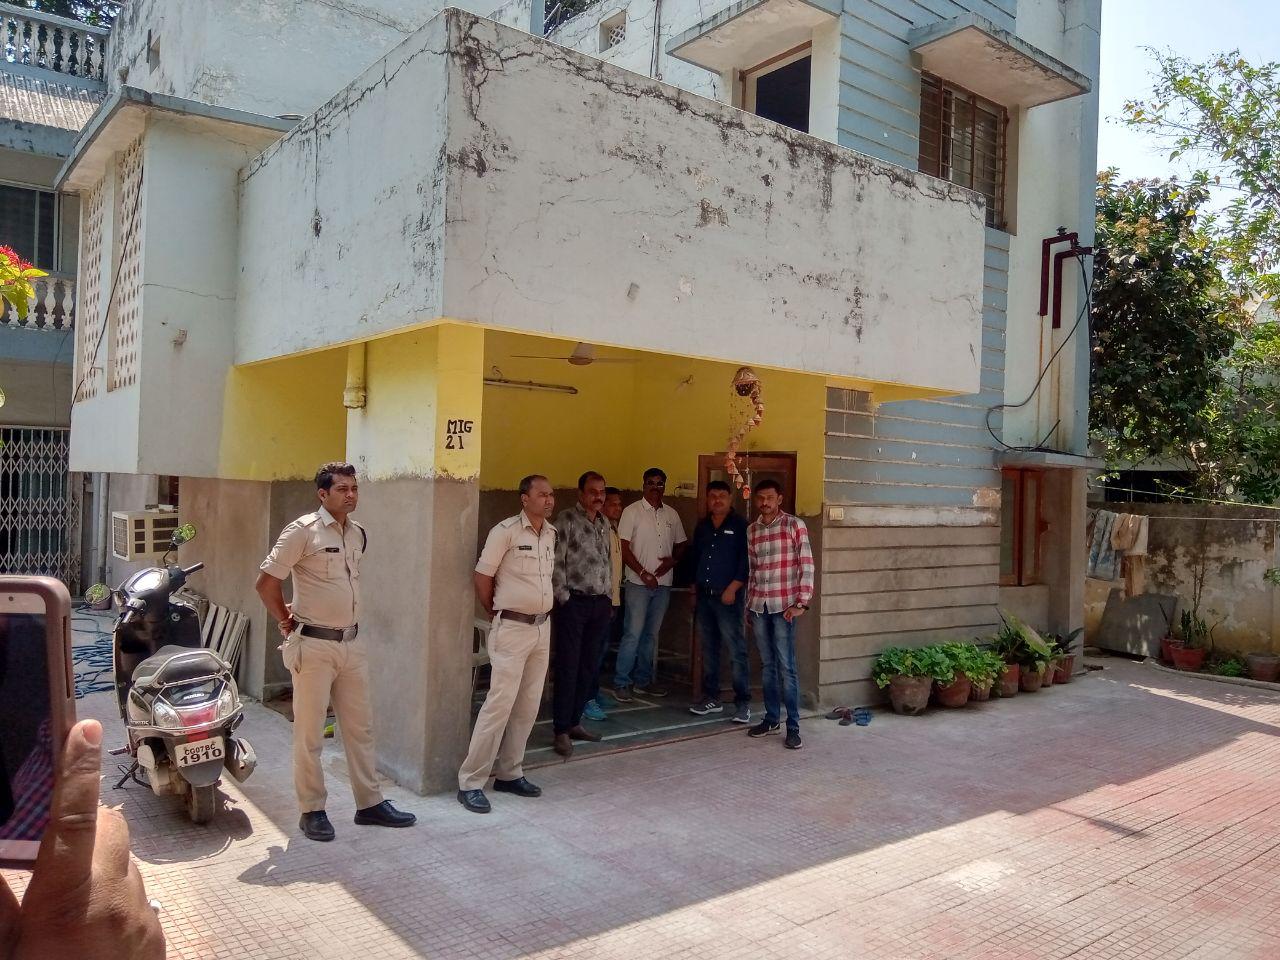 EOW raid at Excise Officer's house in Bilaspur